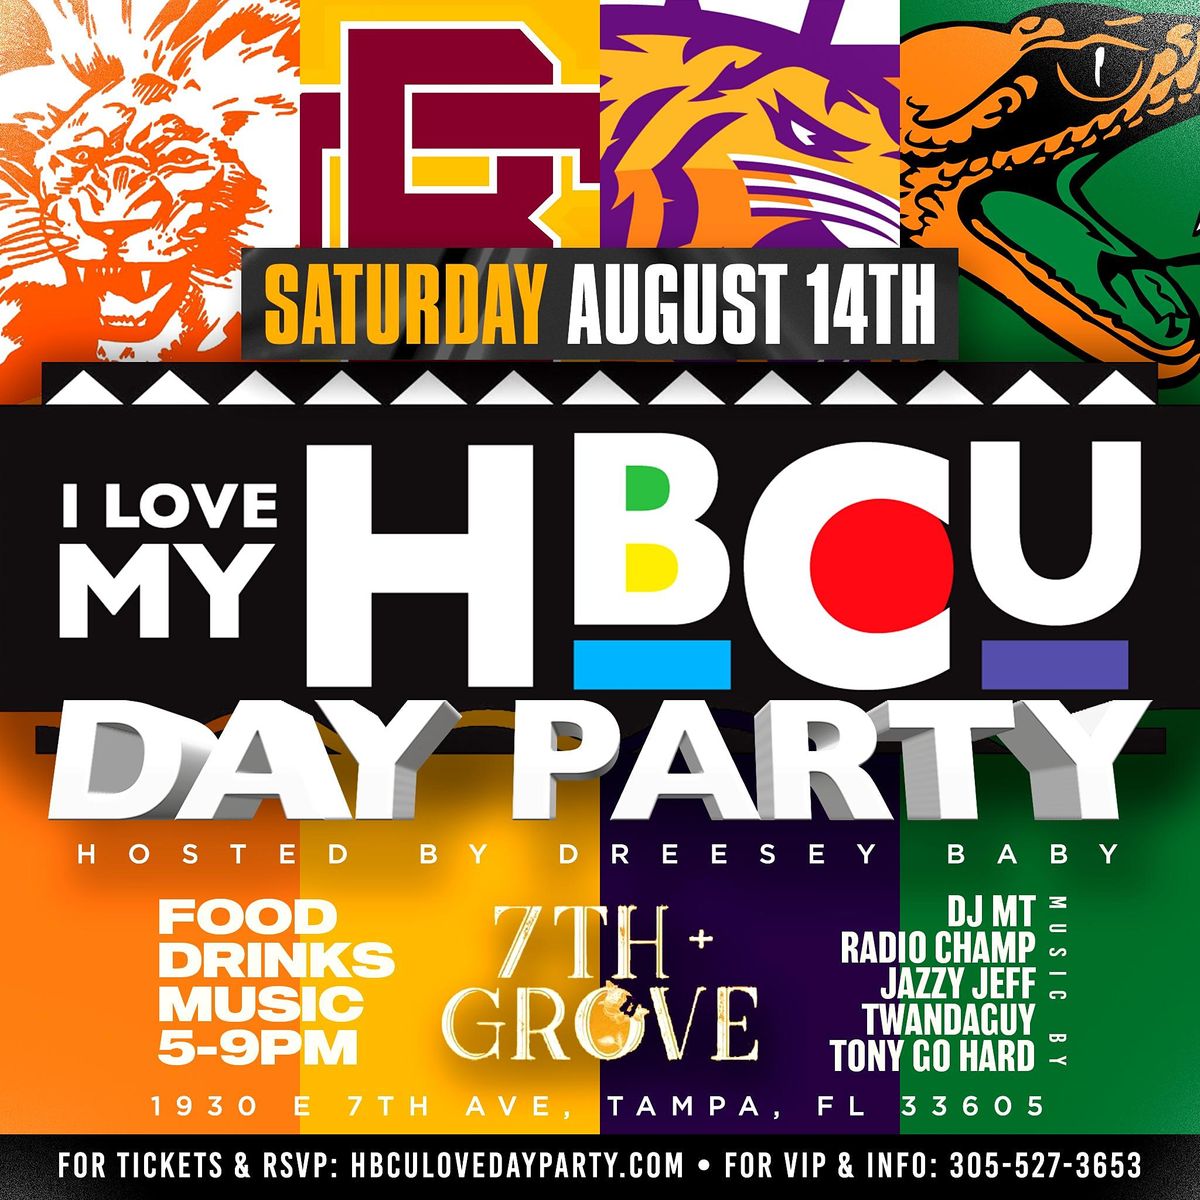 I LOVE MY HBCU DAY PARTY!